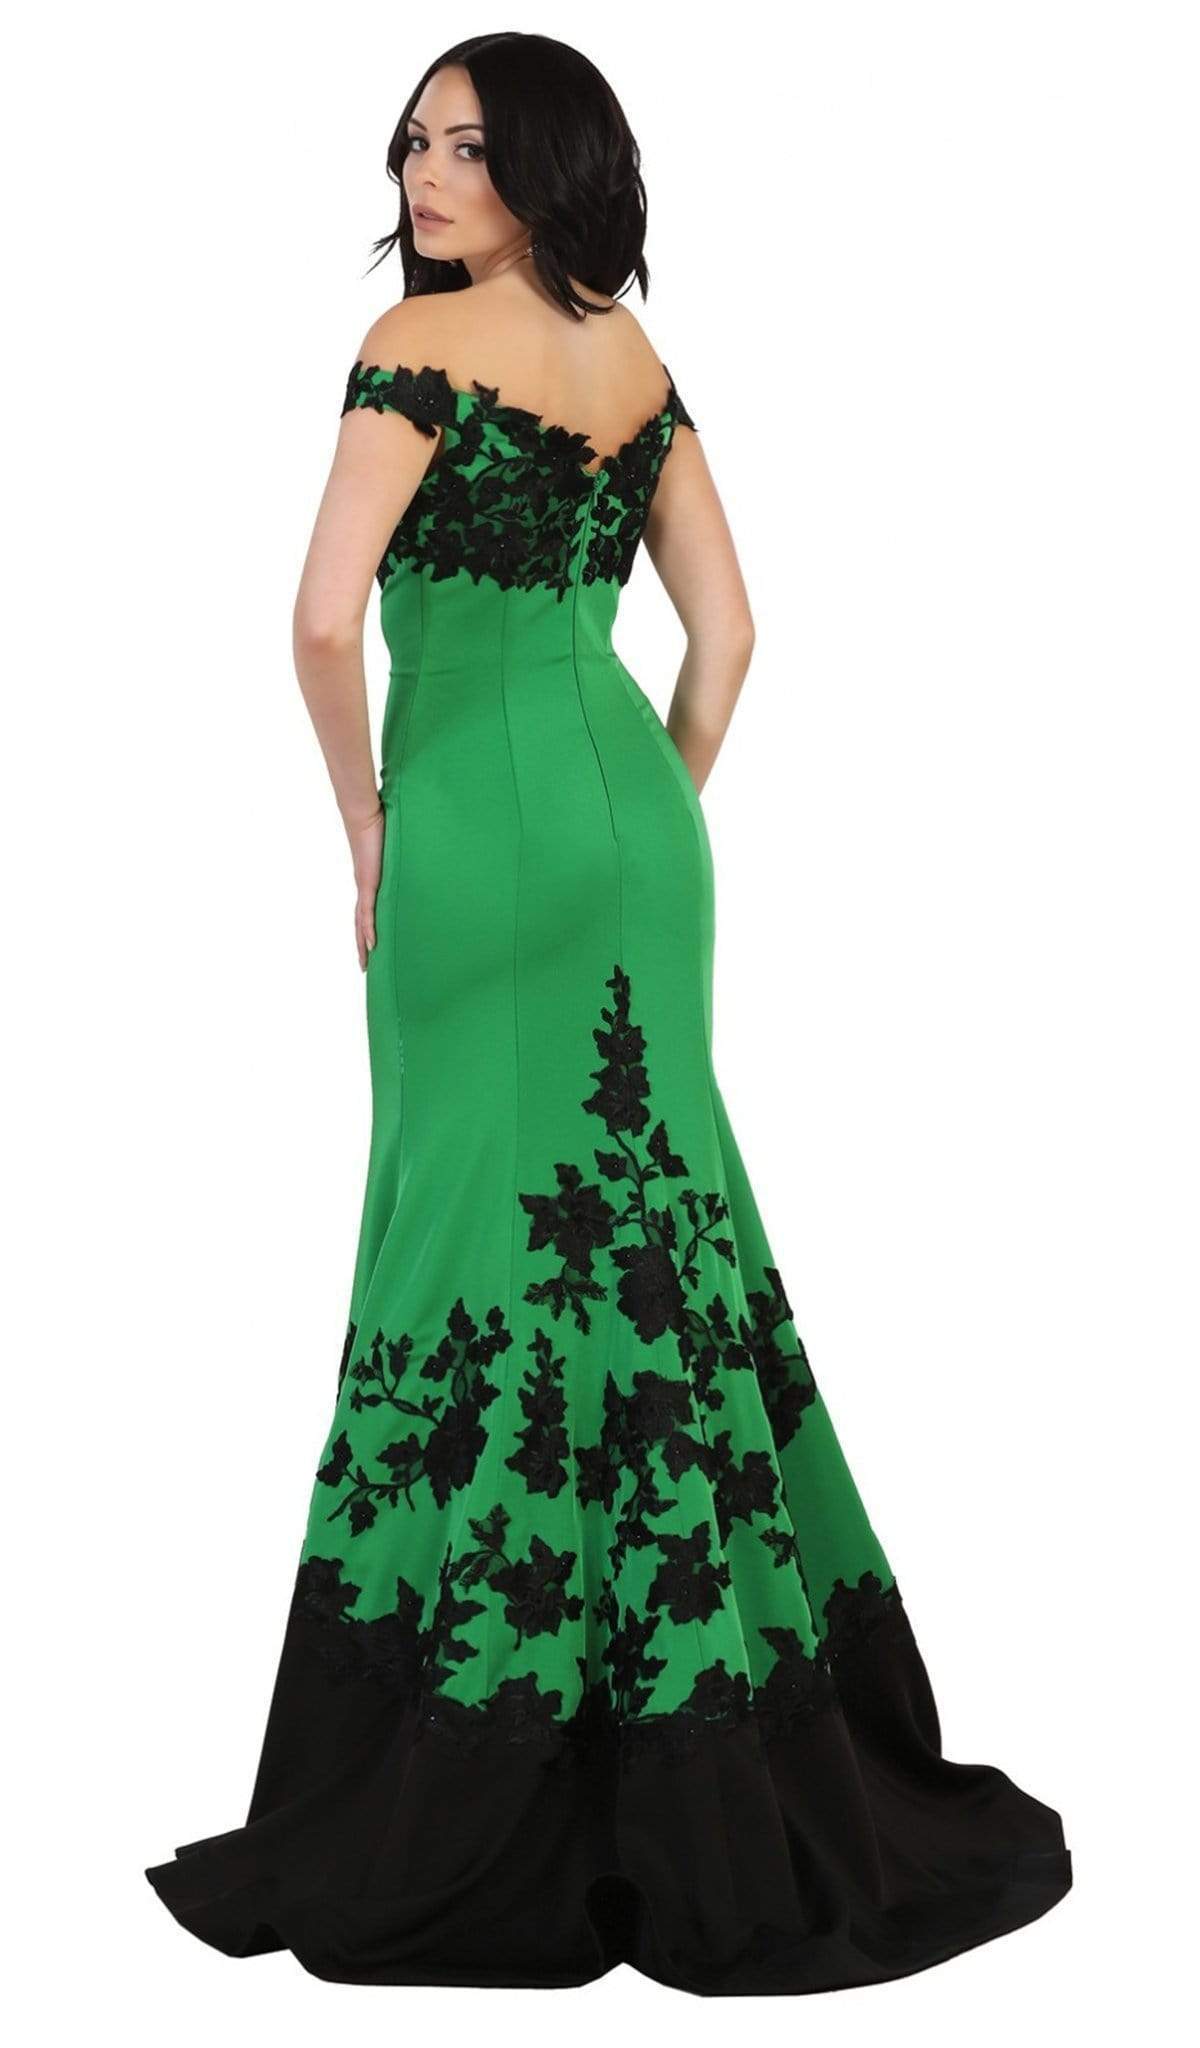 May Queen - RQ7499 Two Toned Off Shoulder Mermaid Gown Special Occasion Dress